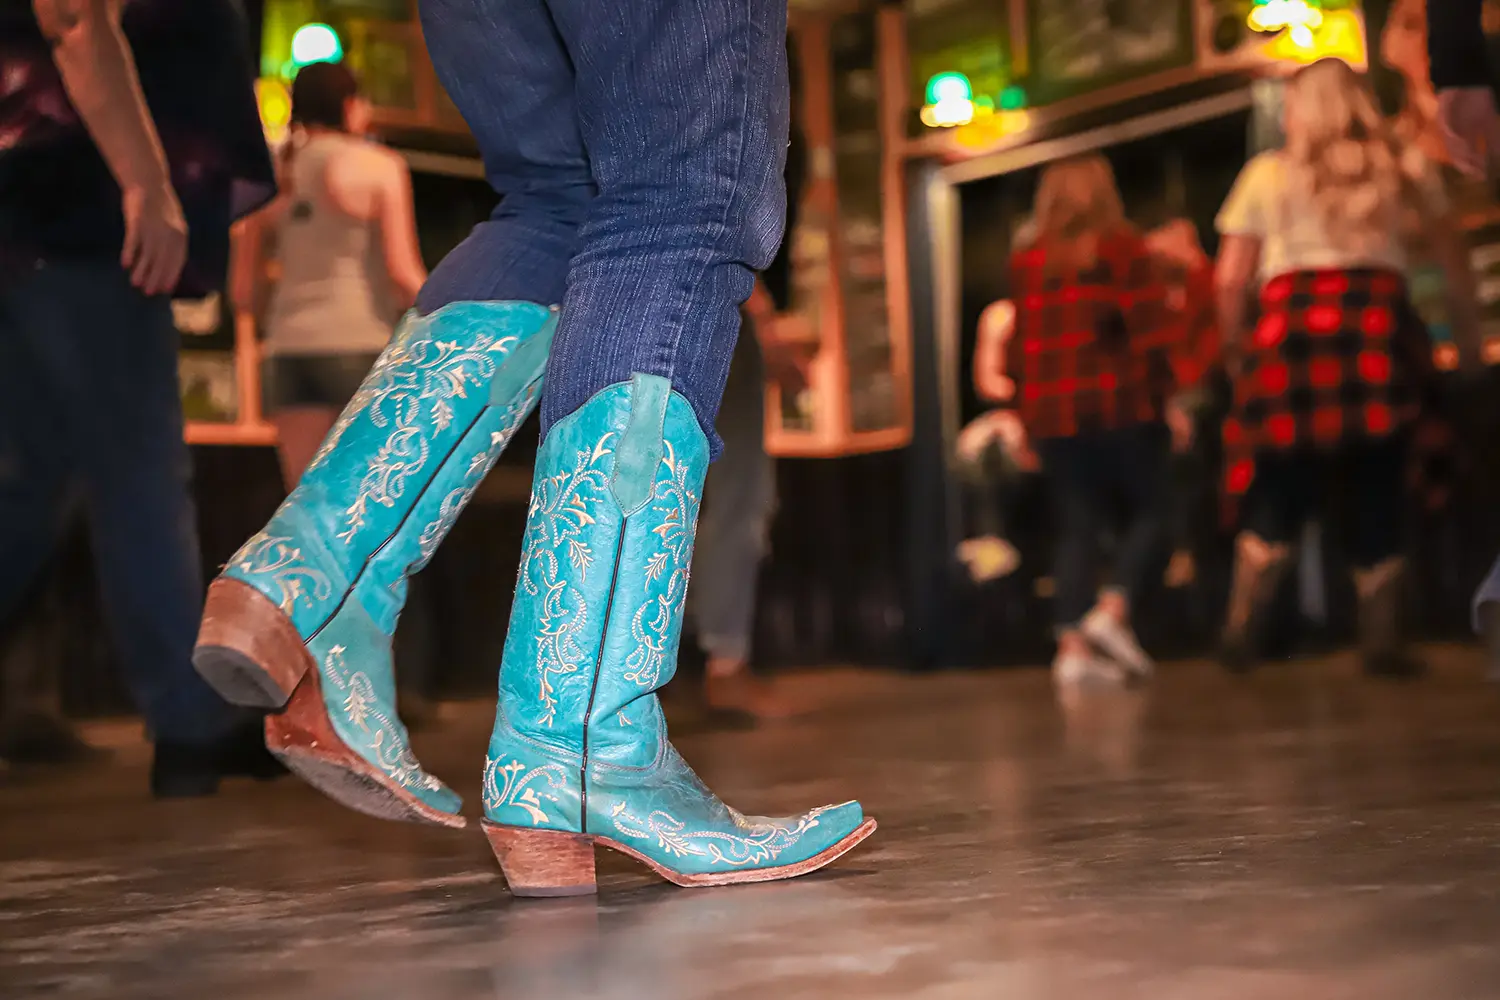 A female wearing turqoise cowboy boots dances at a bar`s country-themed night.